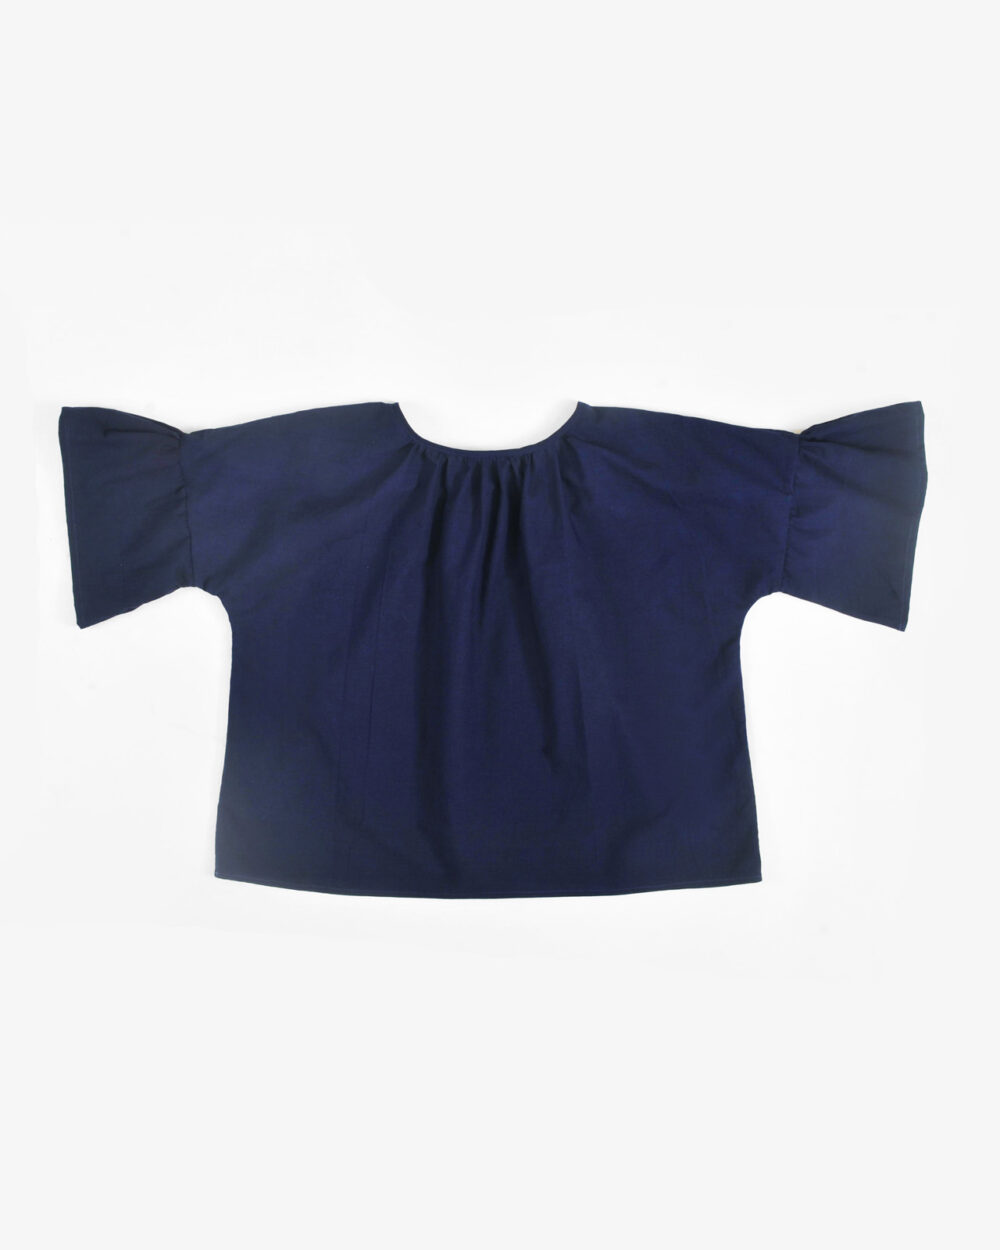 blue organic blouse top sustainable women'sclothing